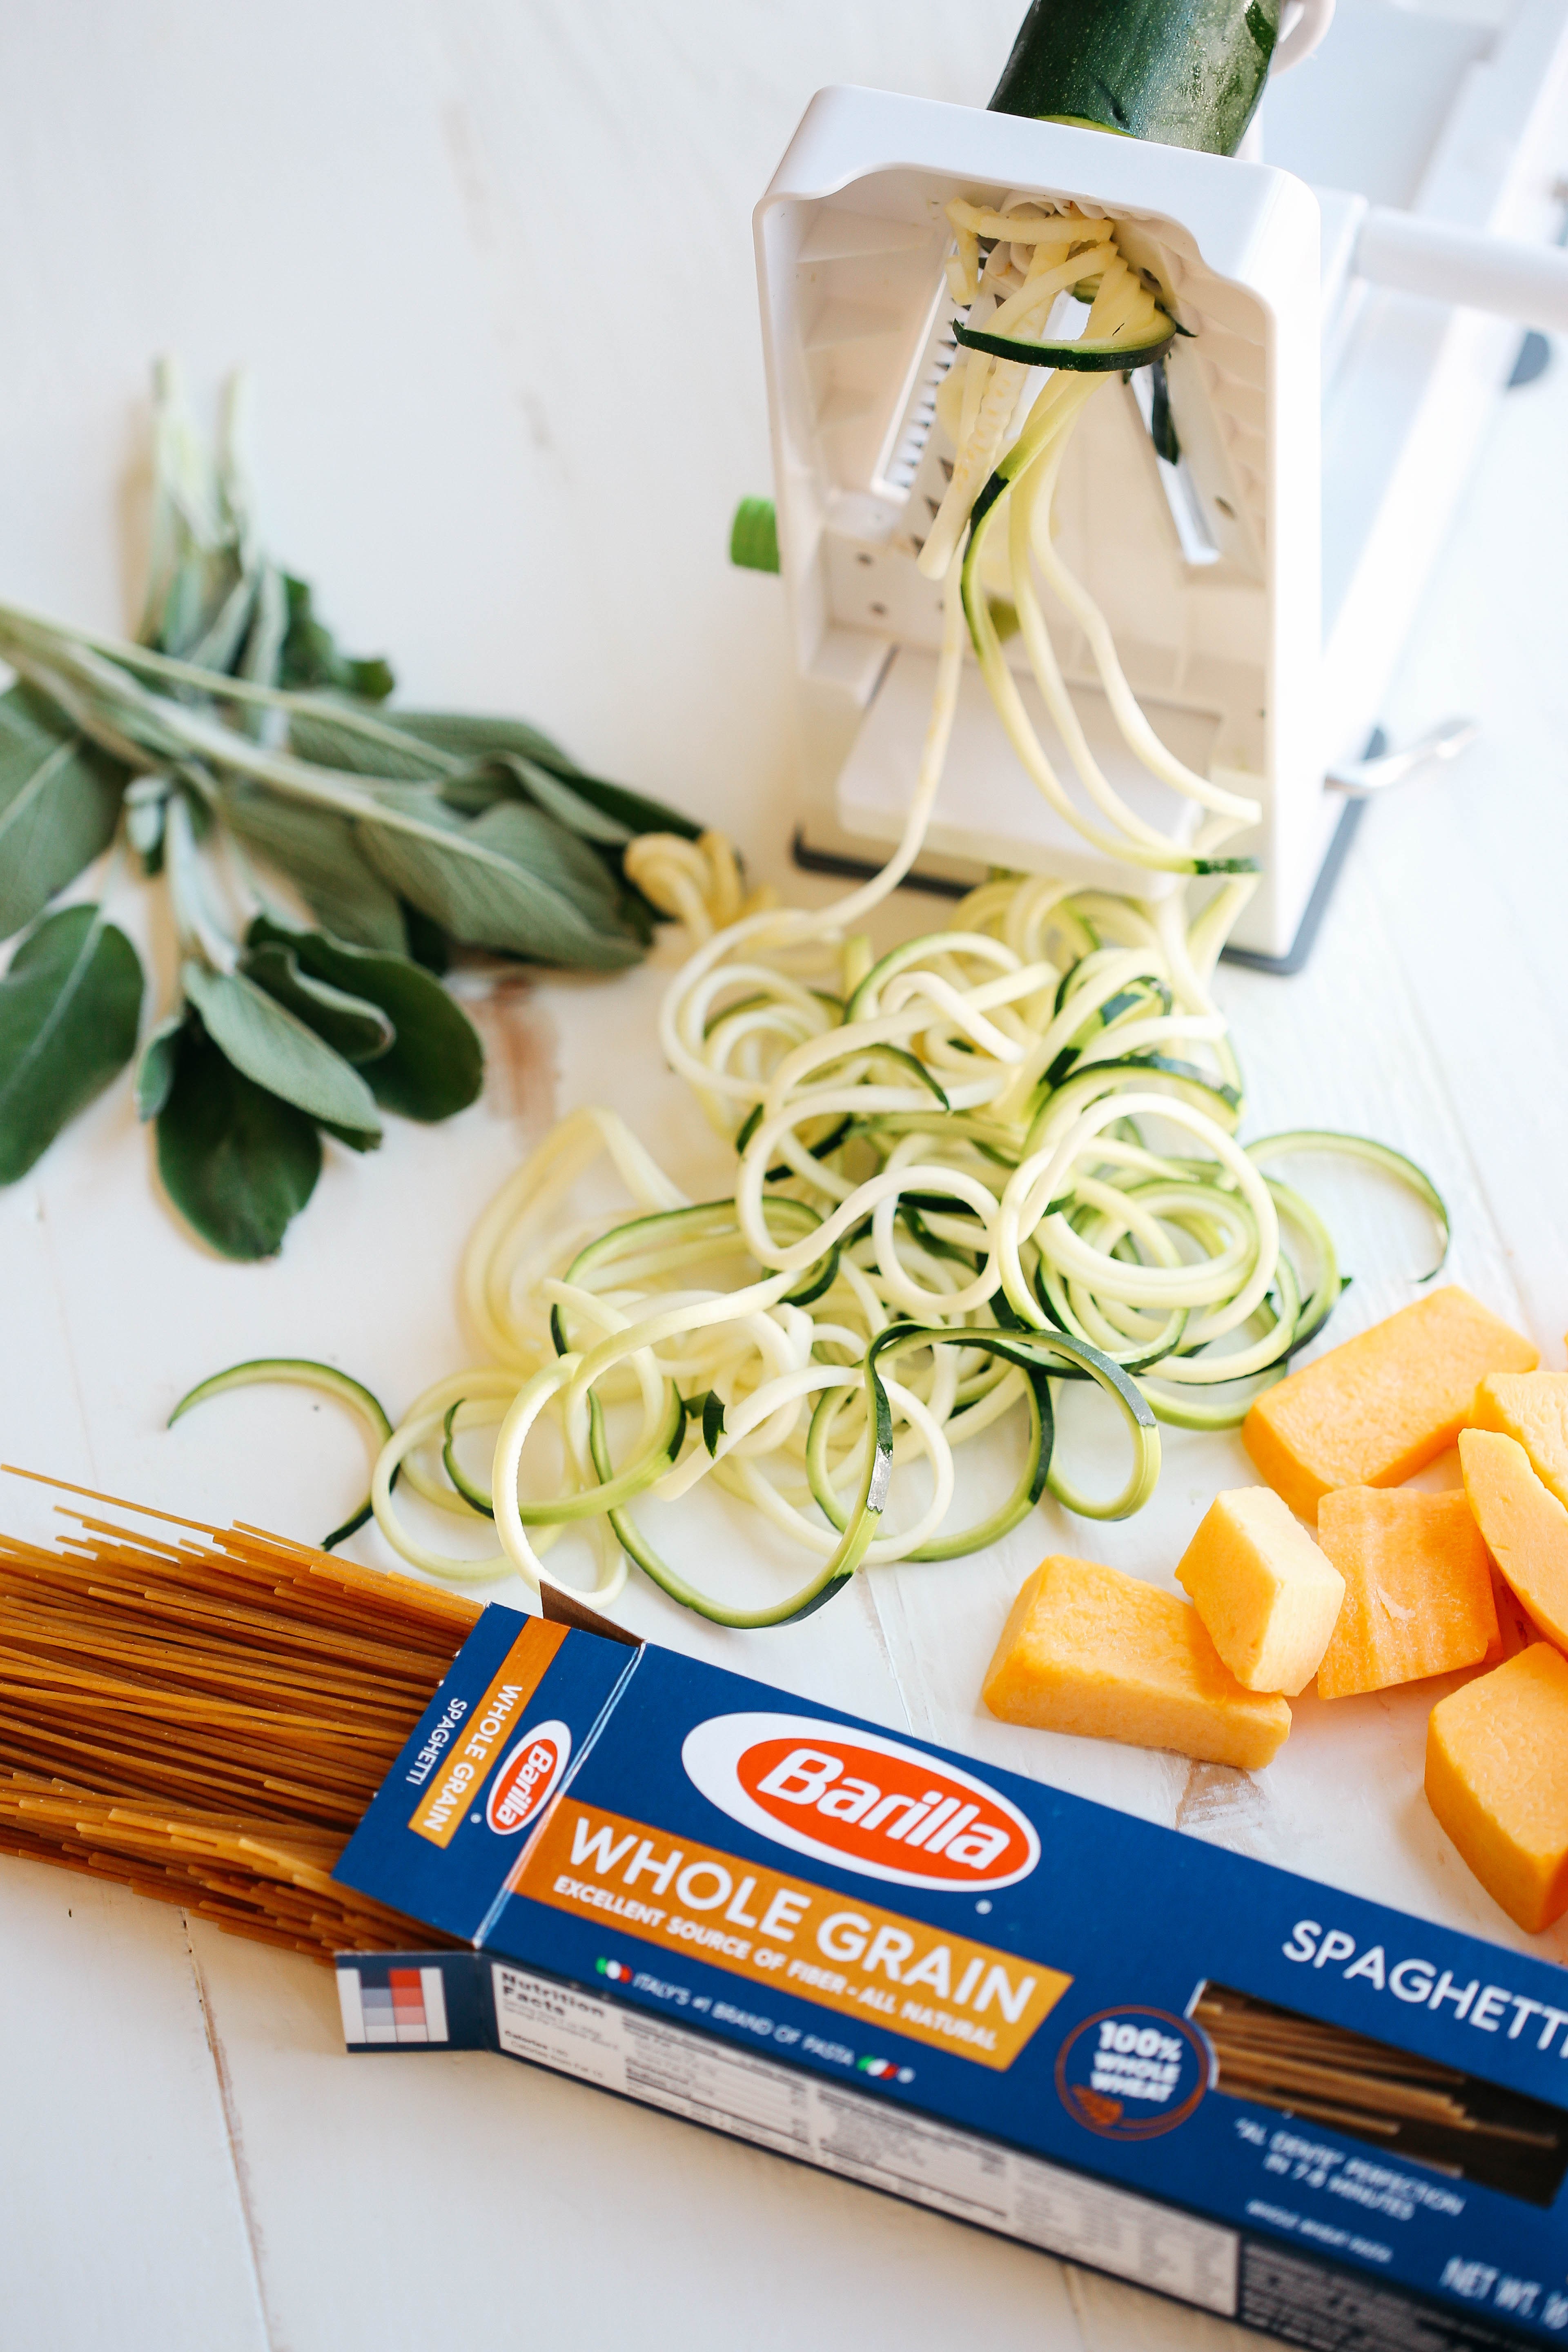 This Butternut Squash & Sage Spaghetti with Zucchini Noodles that is vegan, dairy-free and can easily be made in just 30 minutes using a few simple healthy ingredients!